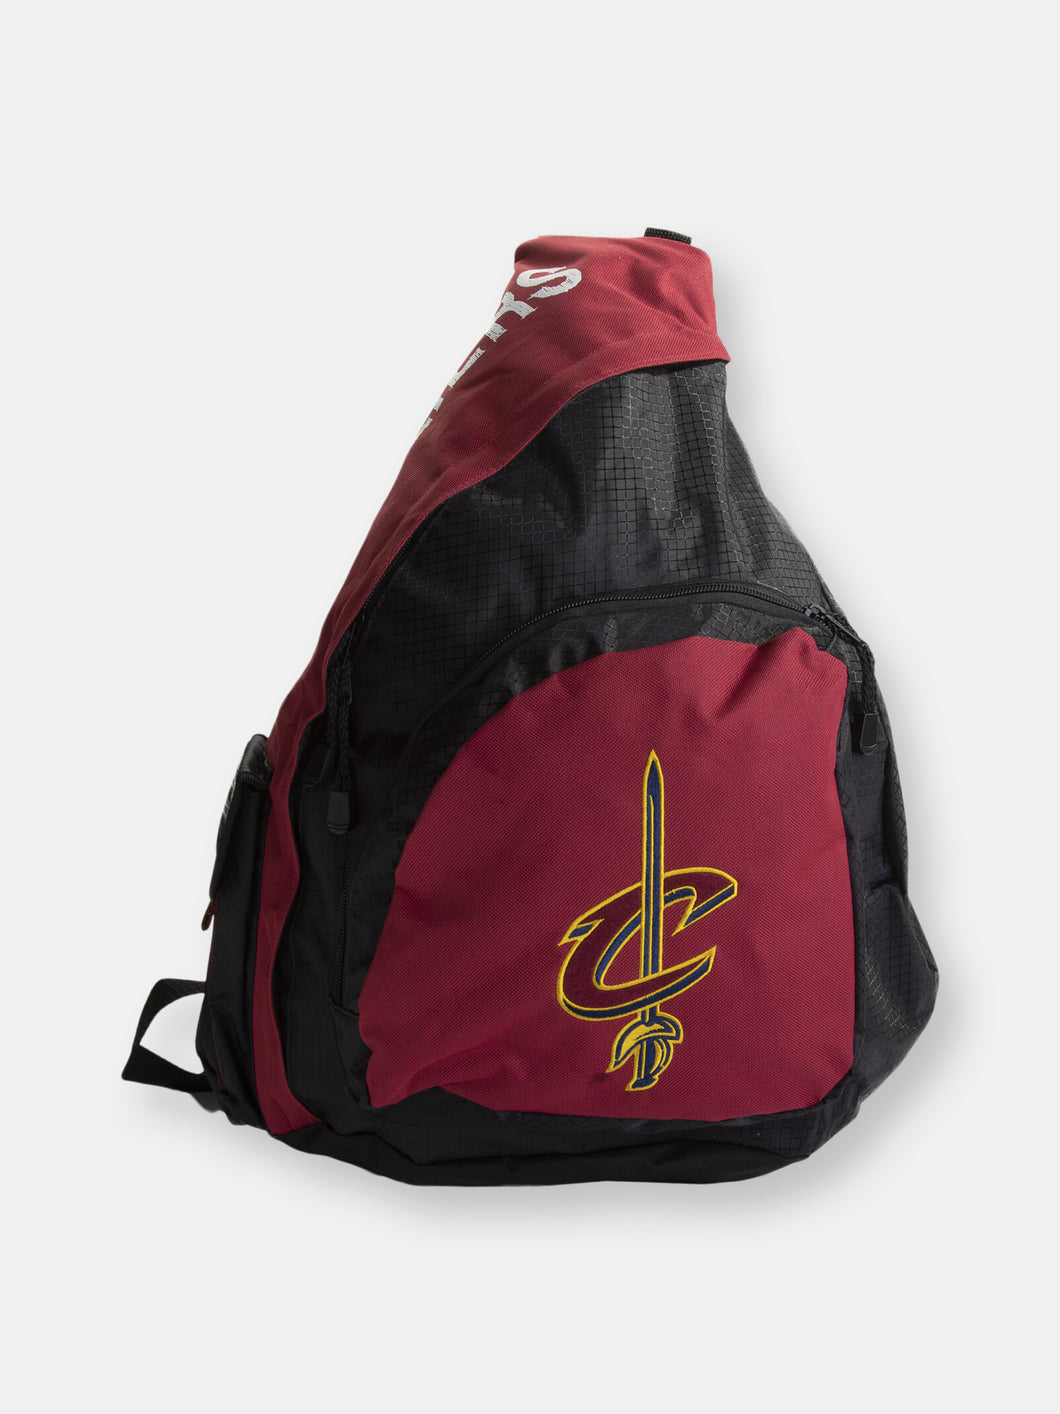 The Northwest Company Nba Cleveland Cavaliers Leadoff Sling Backpack